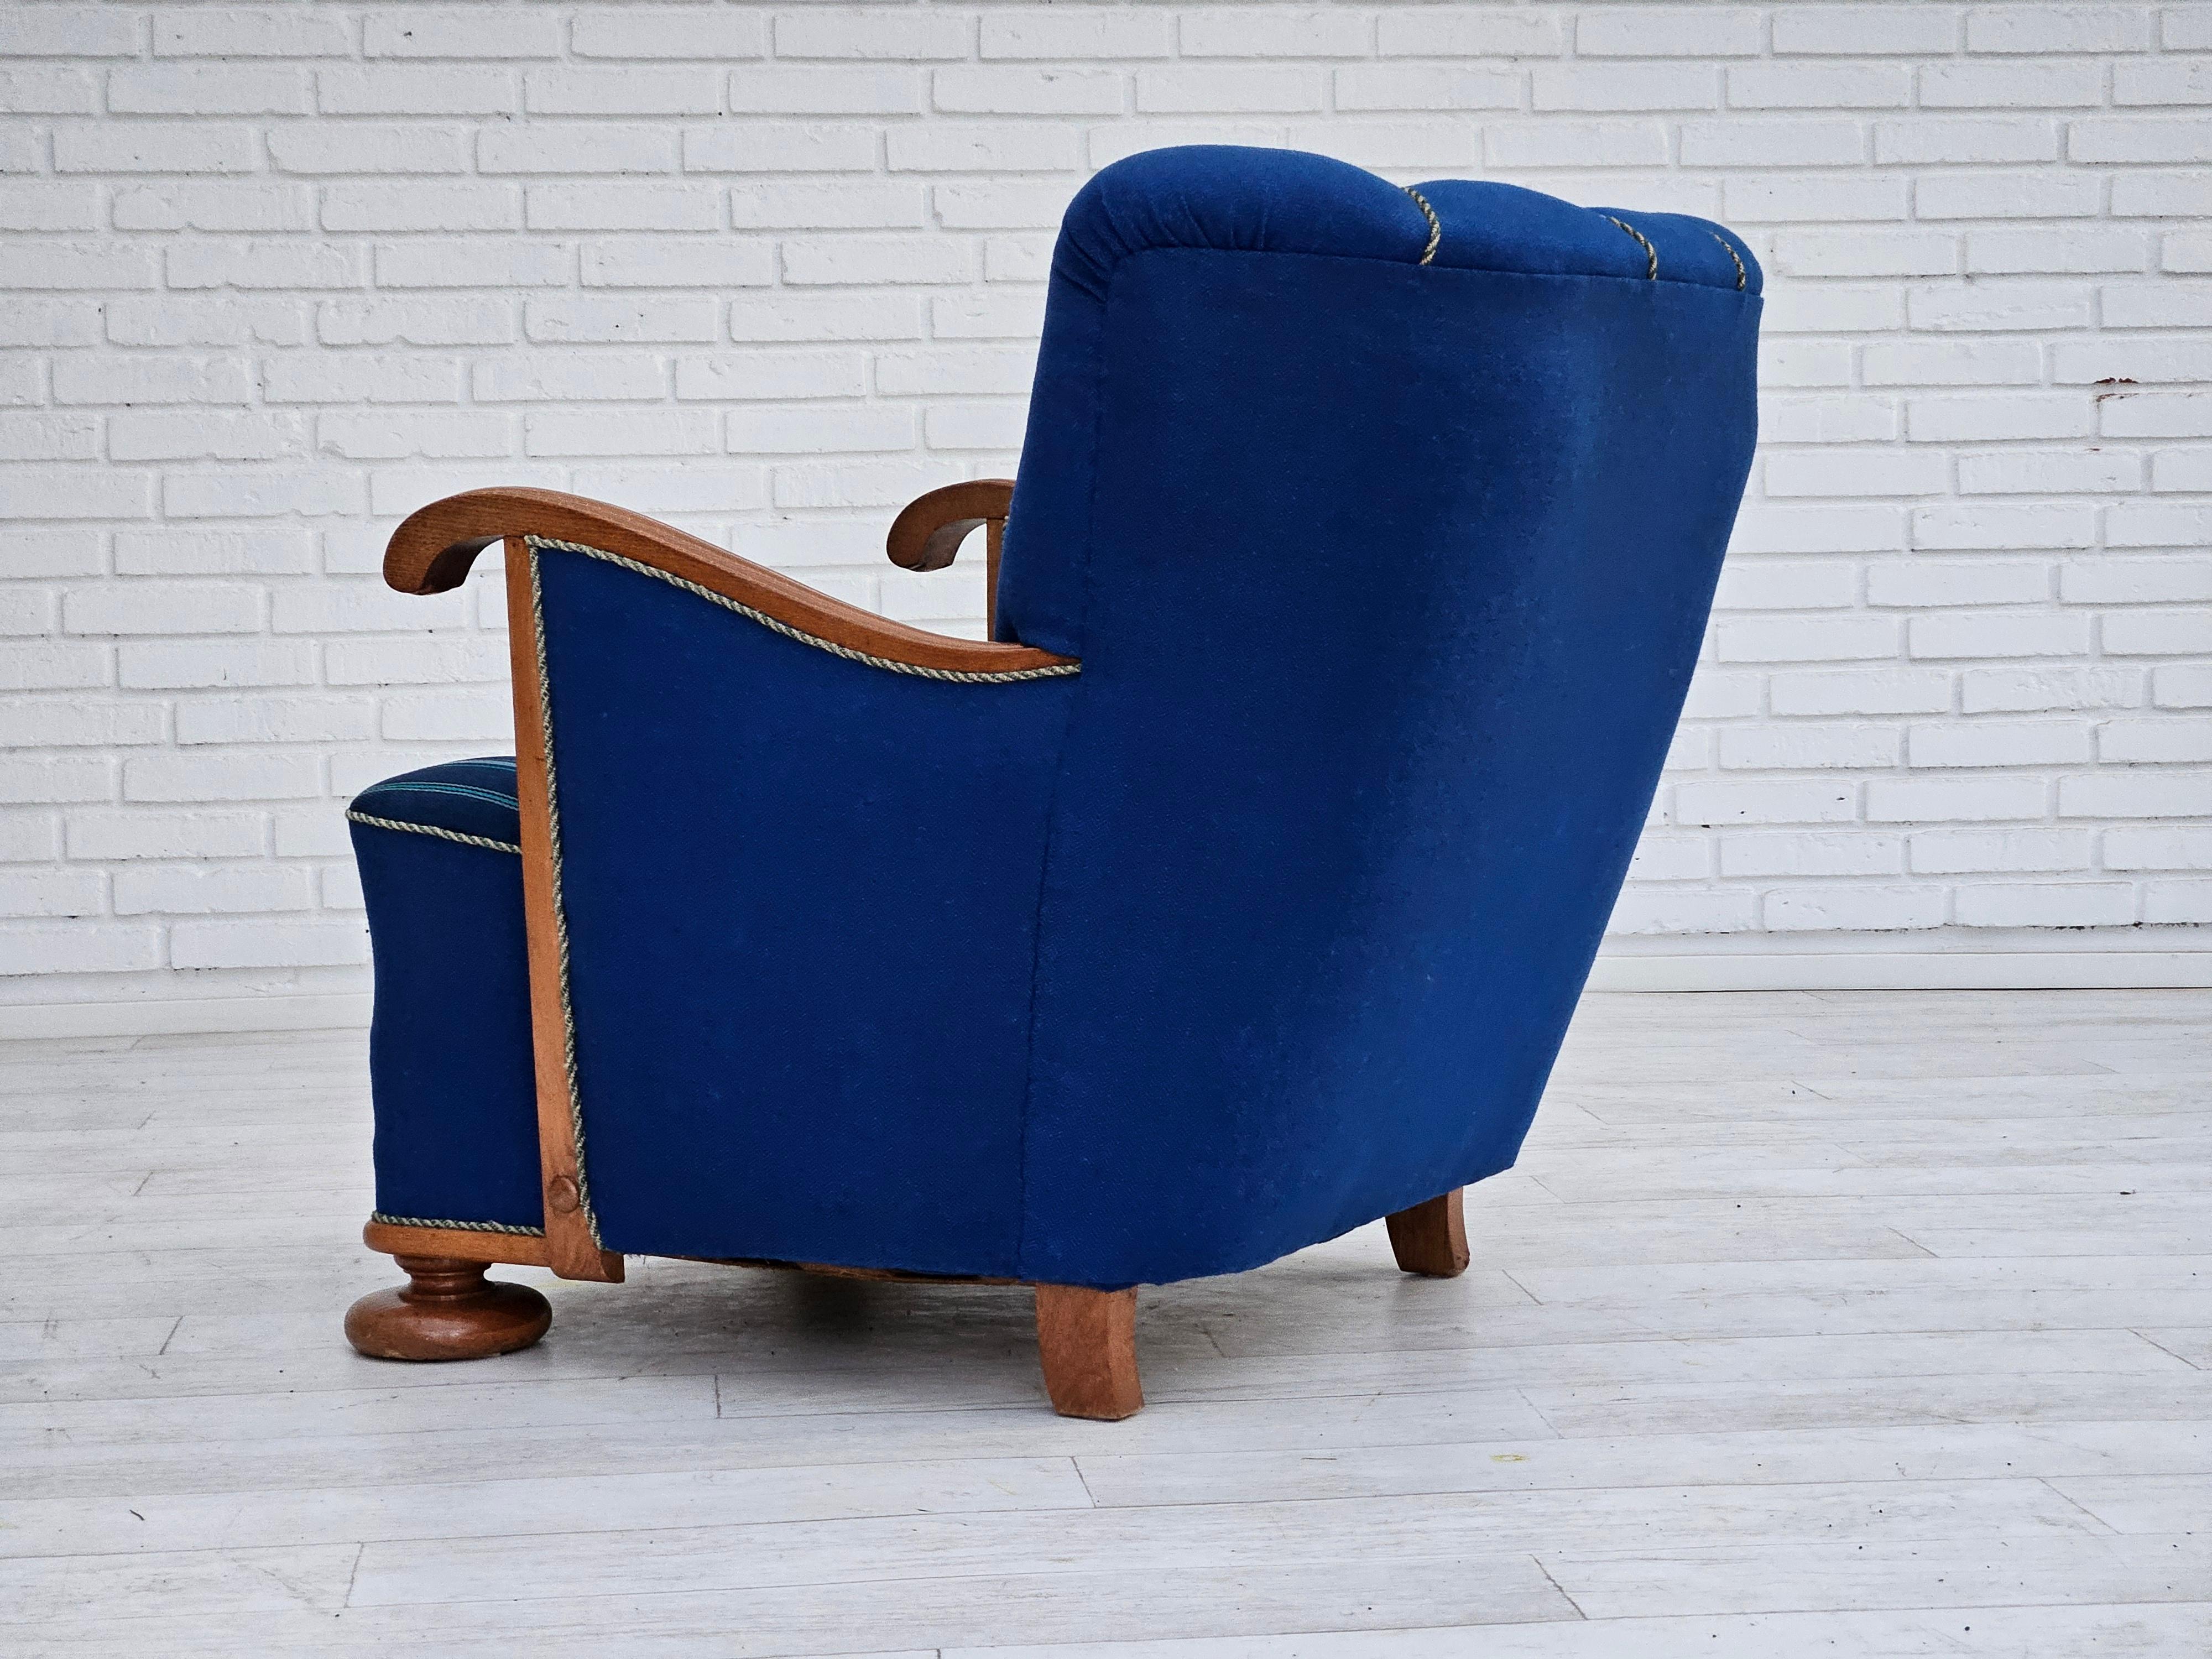 1960s, Danish relax chair with footstool, furniture wool, oak wood. 2